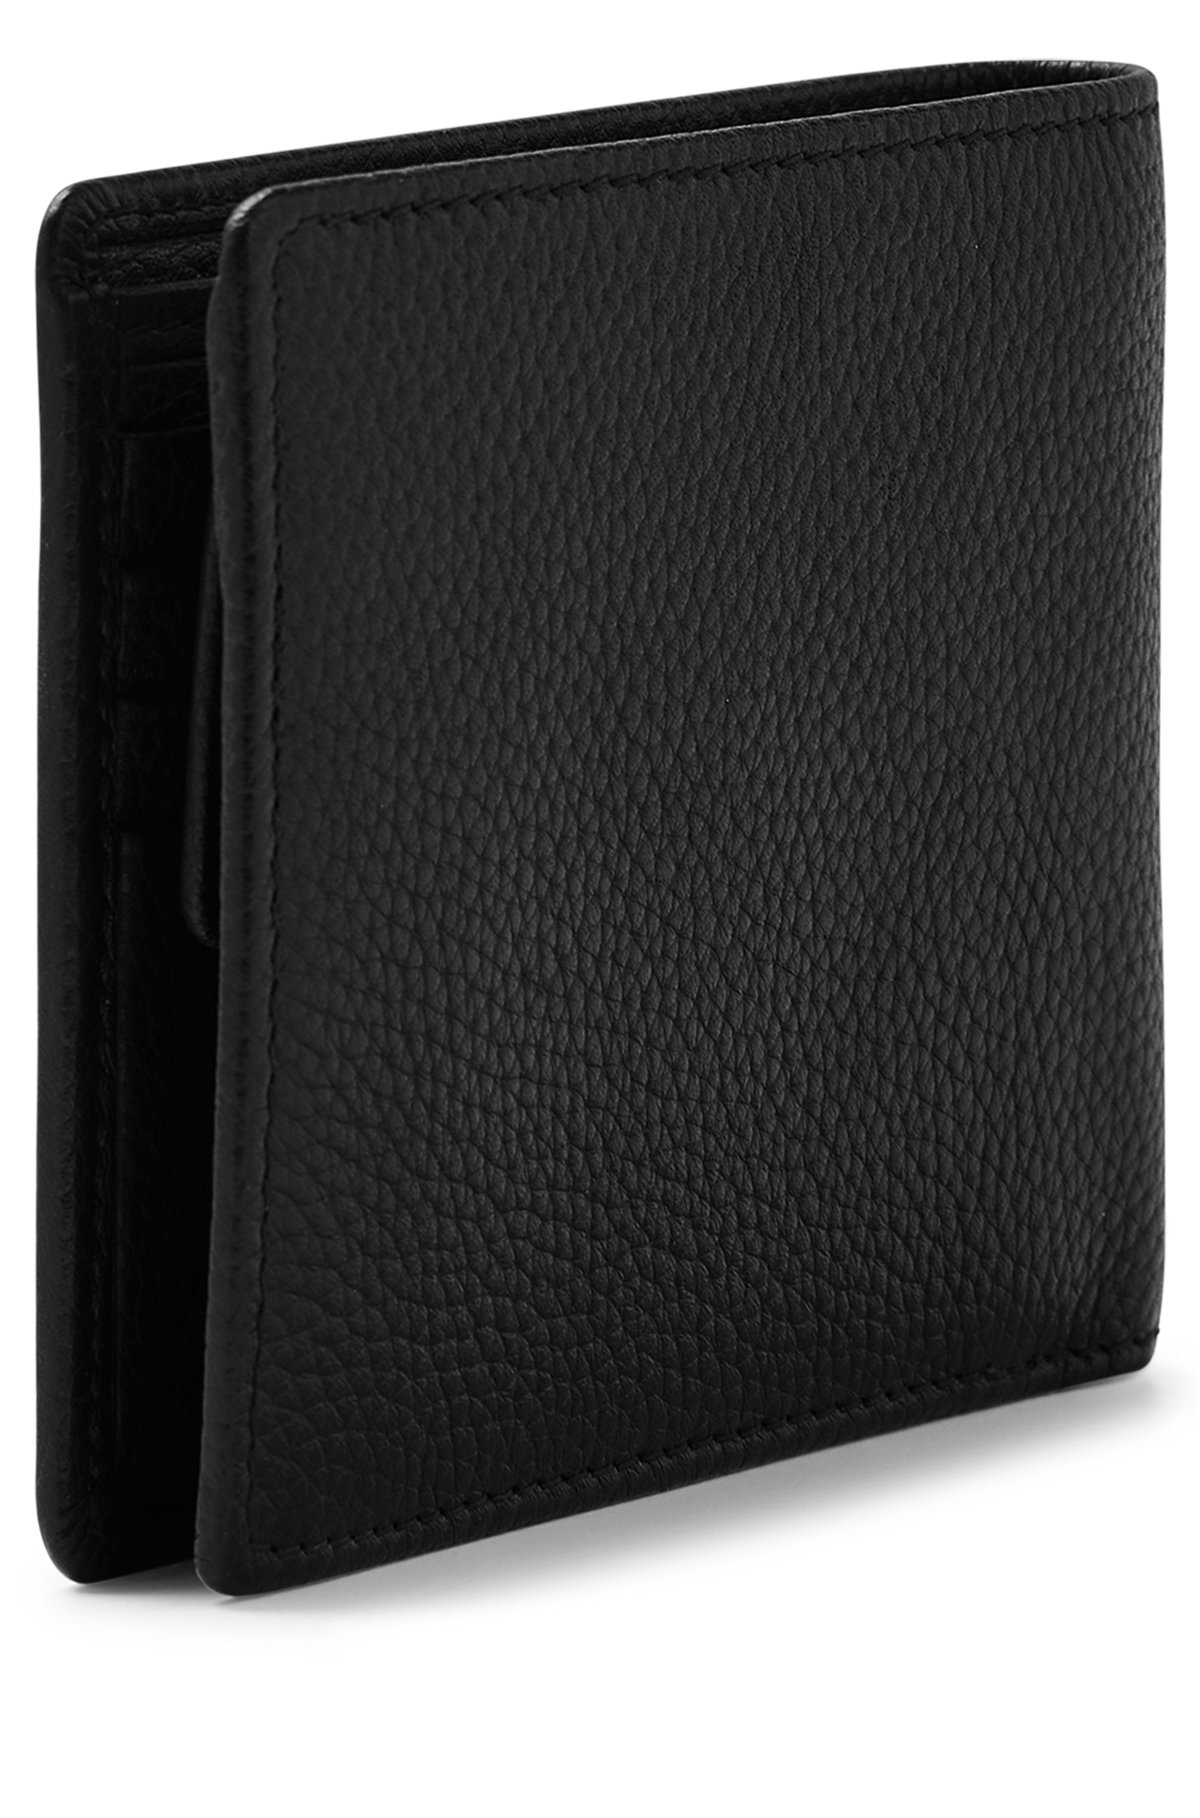 Grained-leather wallet with stacked logo and coin pocket, Black